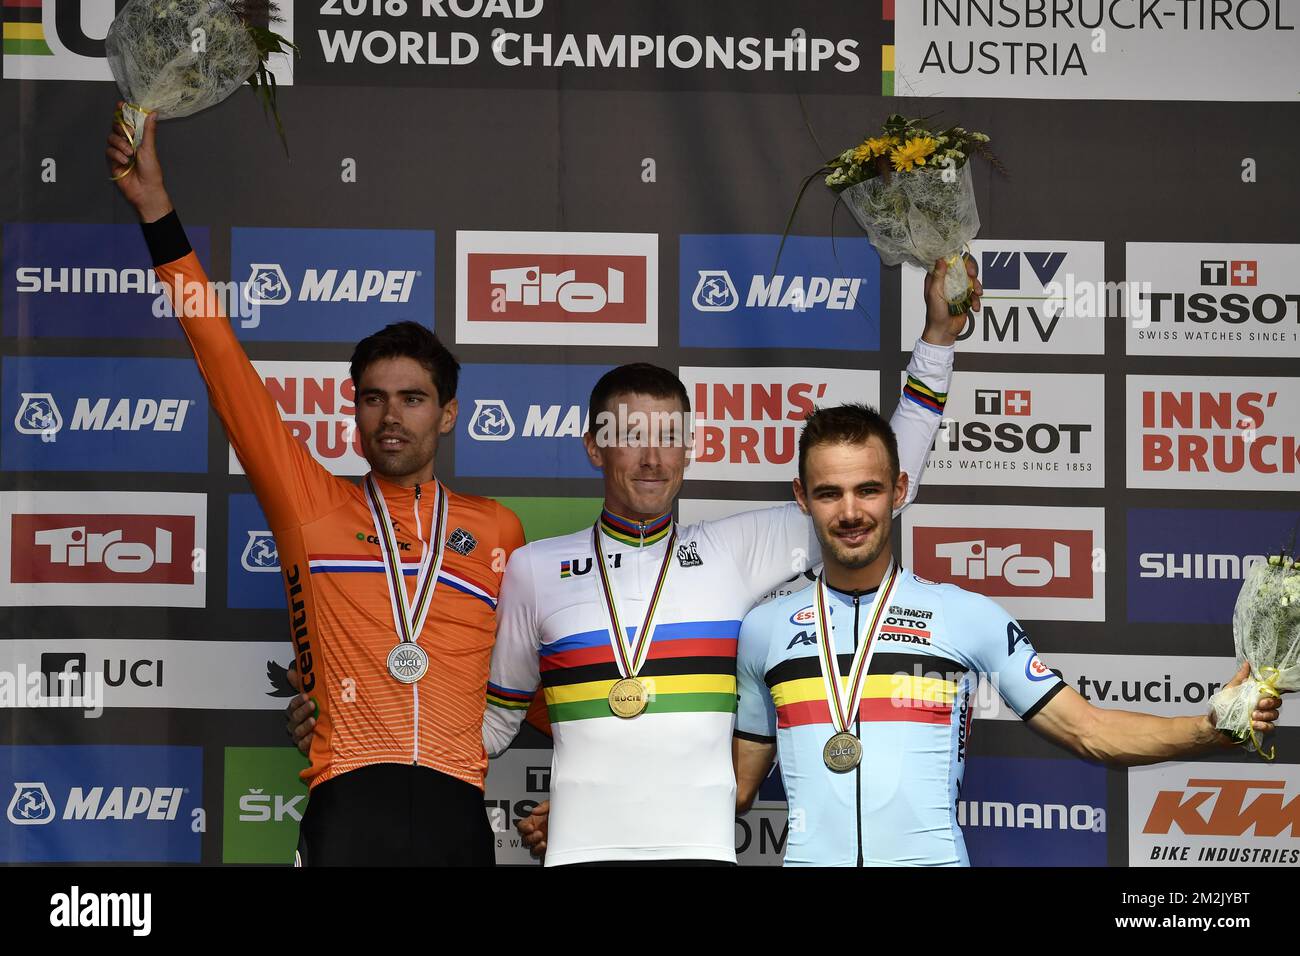 Dutch silver medalist Tom Dumoulin of Team Sunweb, Australian gold medalist Rohan Dennis and Belgian bronze medalist Victor Campenaerts celebrate on the podium of the men's elite individual time trial race at the 2018 UCI Road World Championships Cycling in Innsbruck, Tirol, Austria, Wednesday 26 September 2018. This year's Worlds are taking place from 22 to 30 September. BELGA PHOTO ERIC LALMAND  Stock Photo